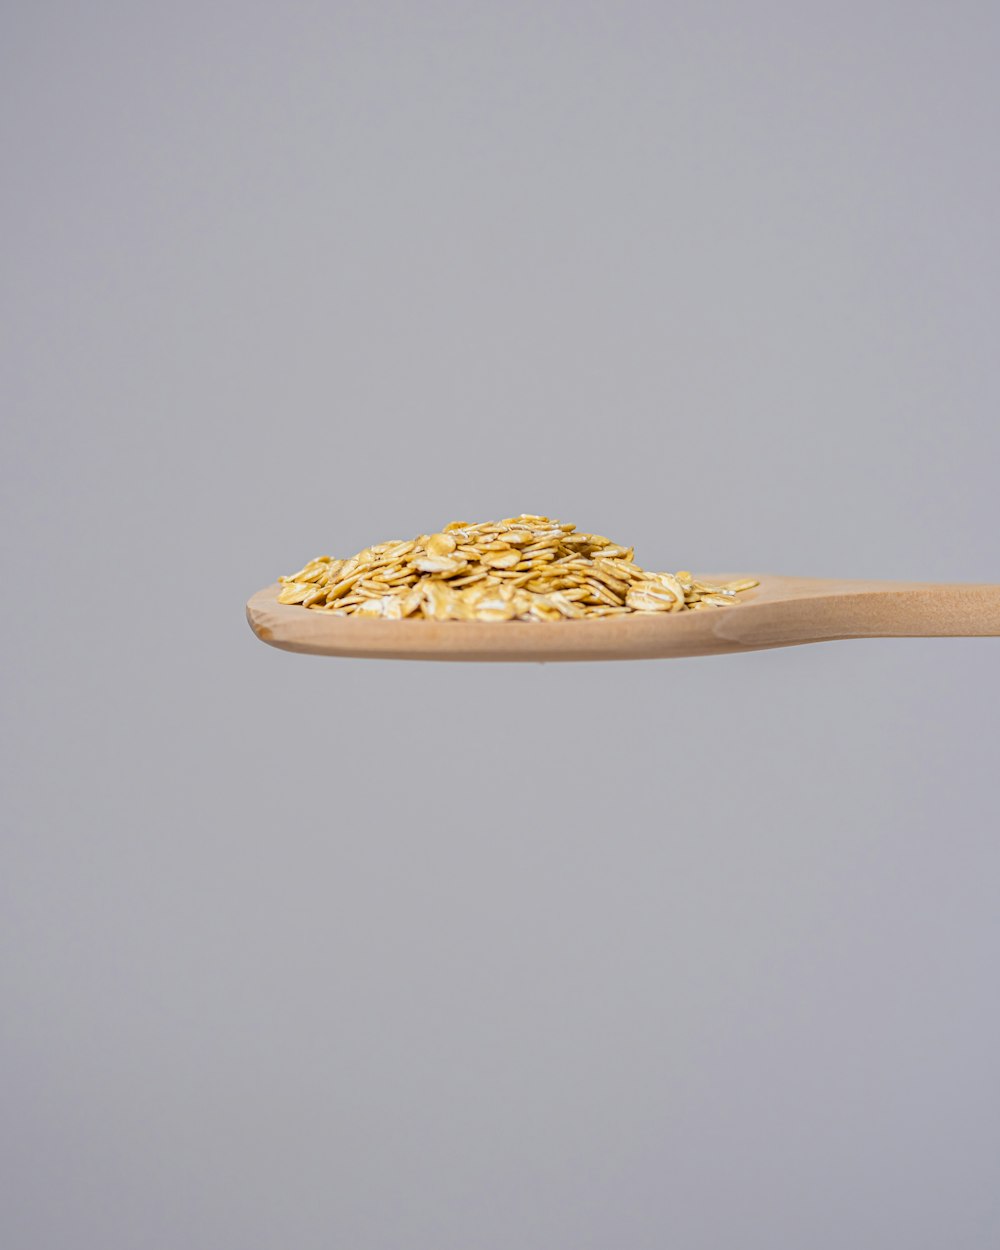 a wooden spoon full of oats on a gray background